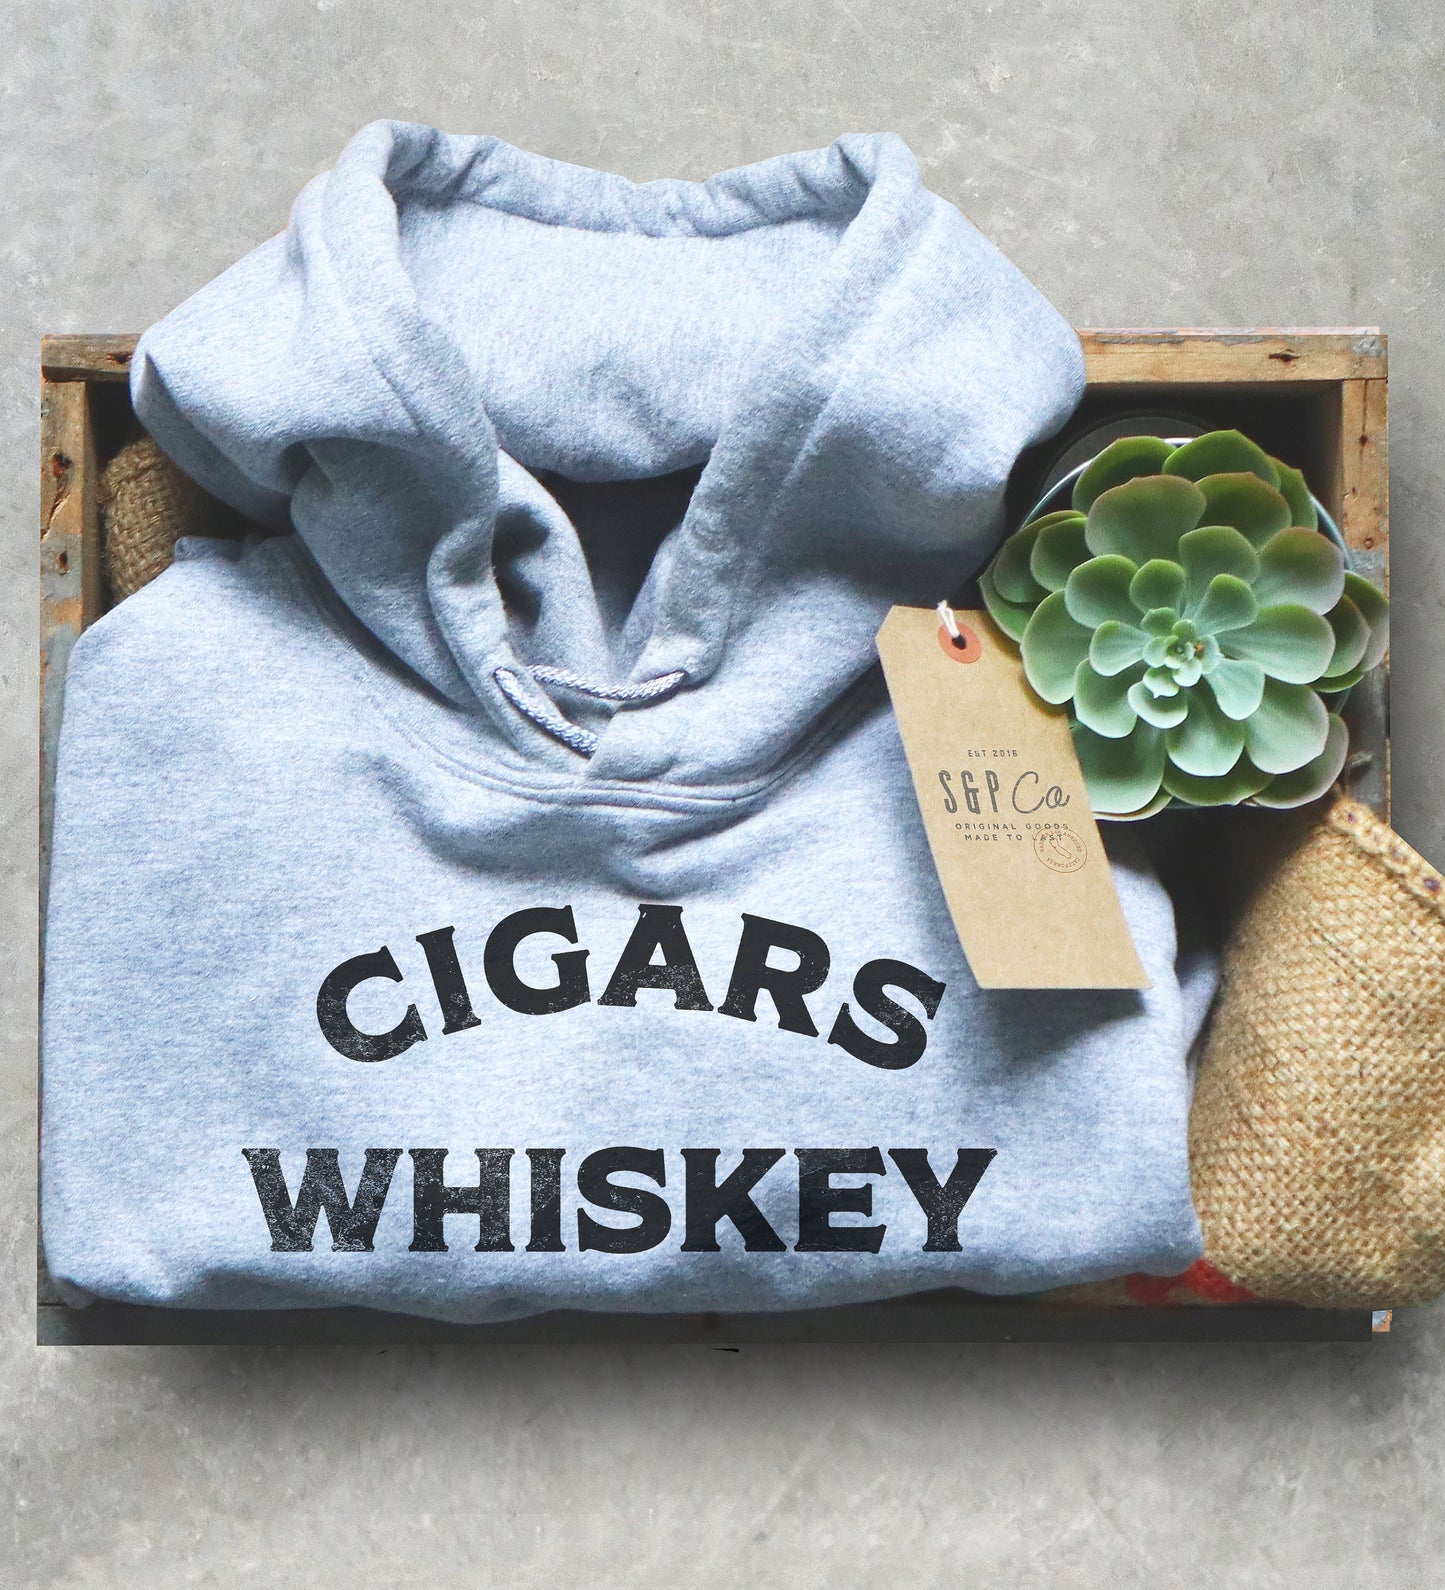 Cigars Whiskey Steak & Freedom Hoodie - Cigar Shirt, Cigar Gift, Whiskey Gift, Steak Lover Gift, Independence Day Gift, Meat Eater Shirt